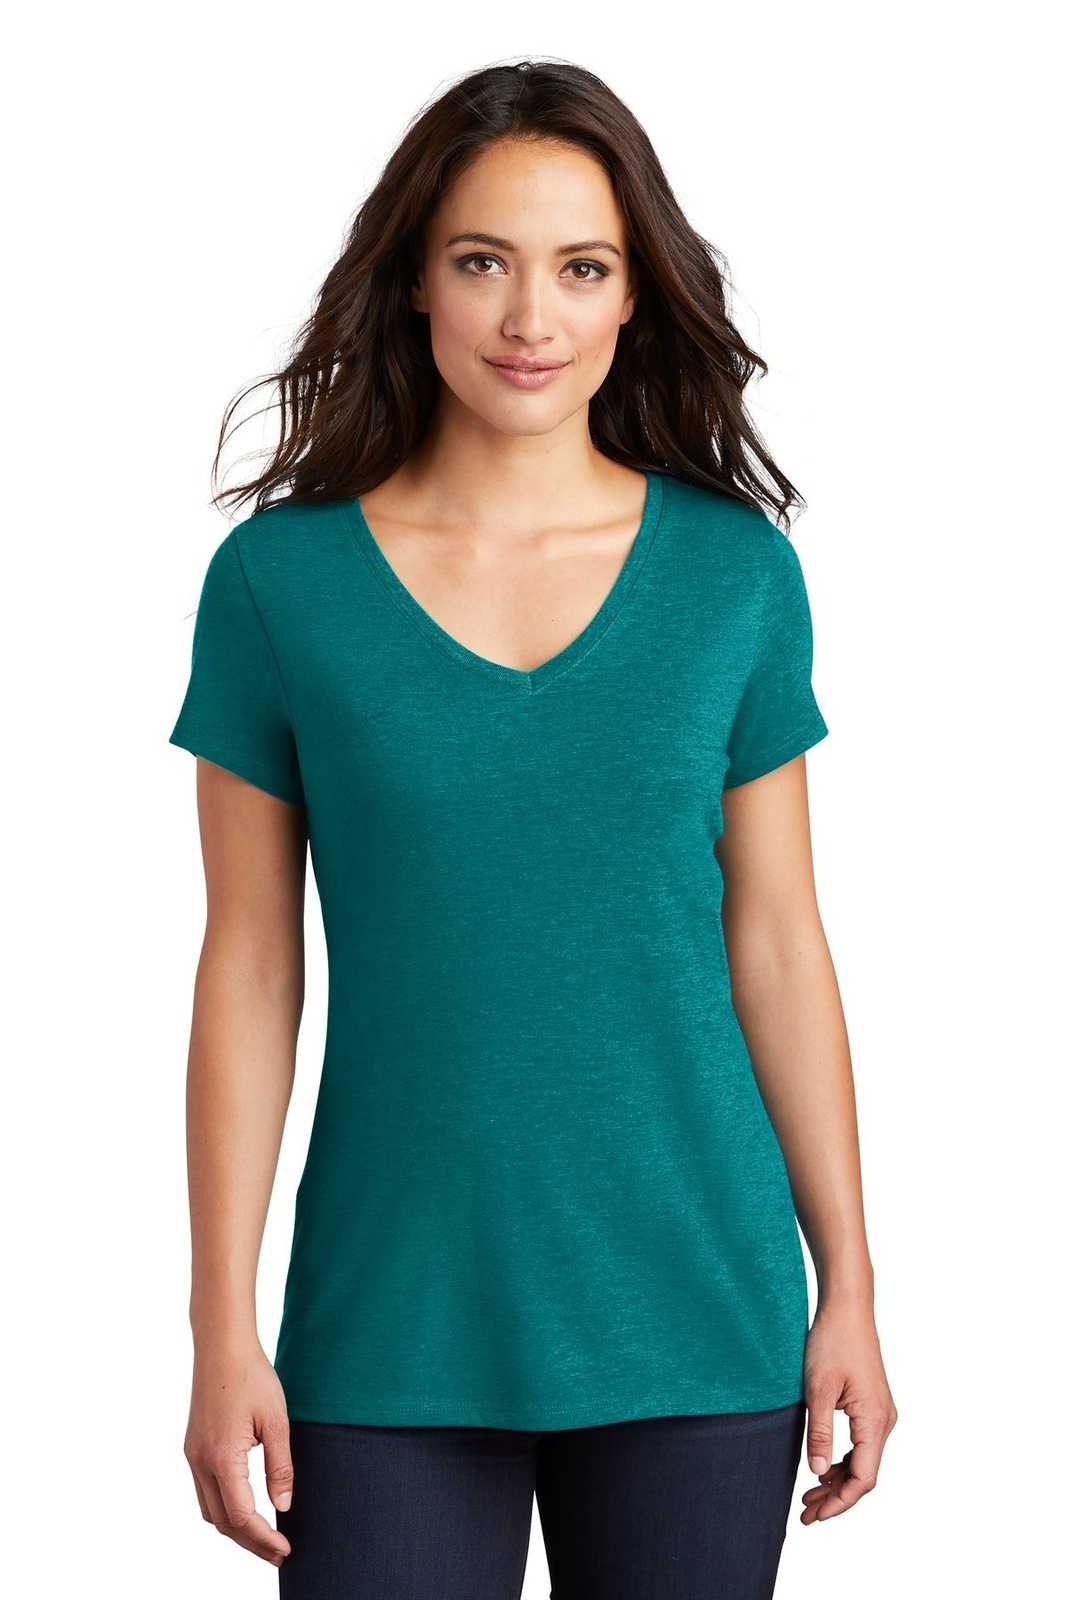 District DM1350L Women's Perfect Tri V-Neck Tee - Heathered Teal - HIT a Double - 1